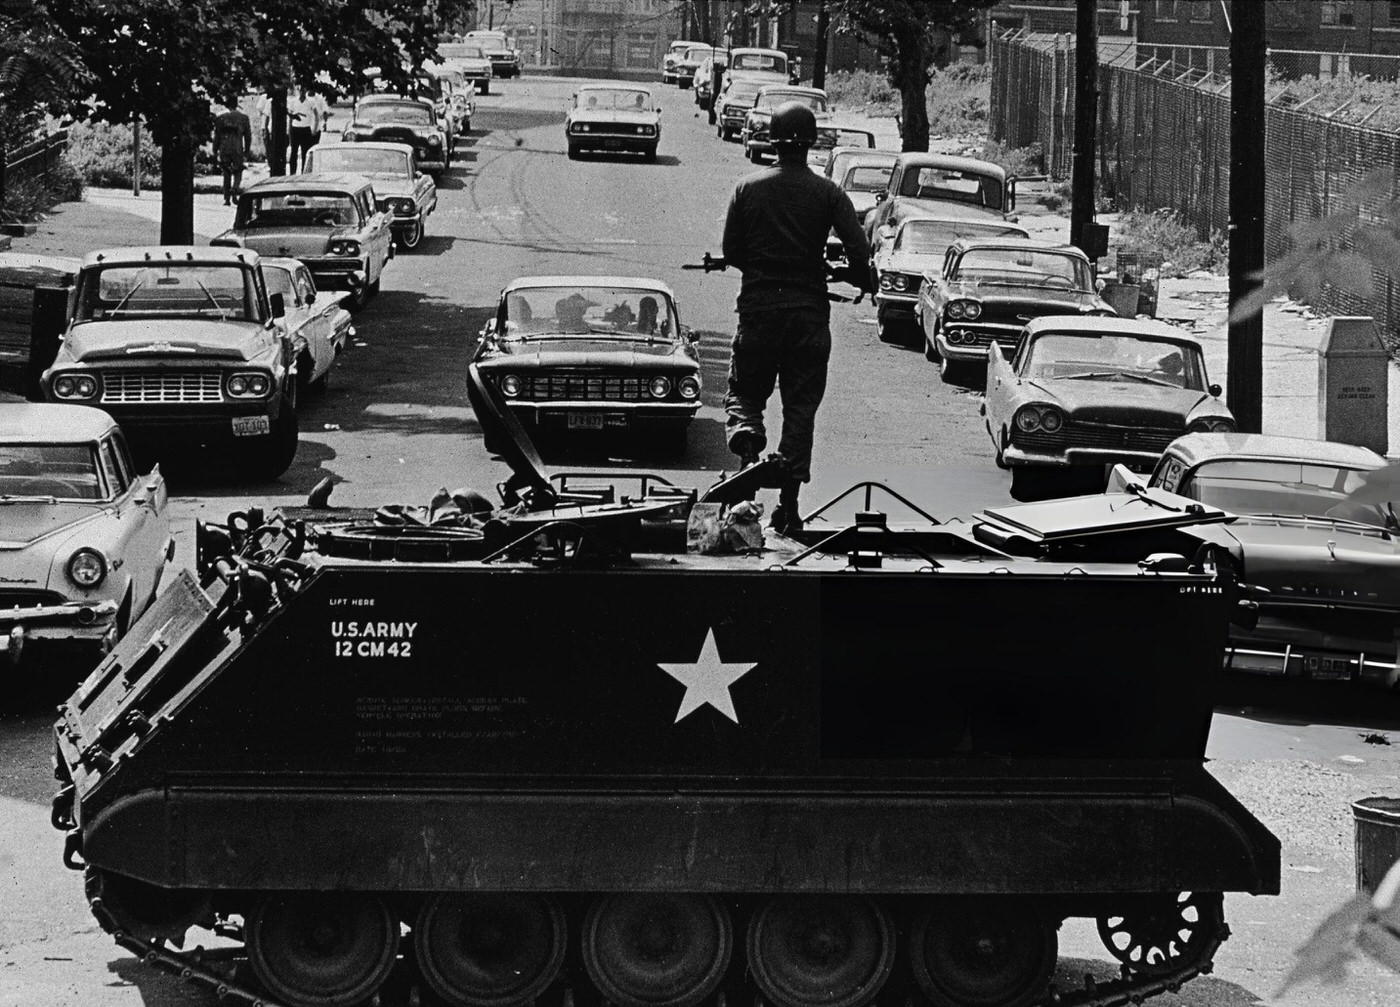 A National Guardsmen stands with a rifle atop a personnel carrier vehicle, blocking traffic leaving the area